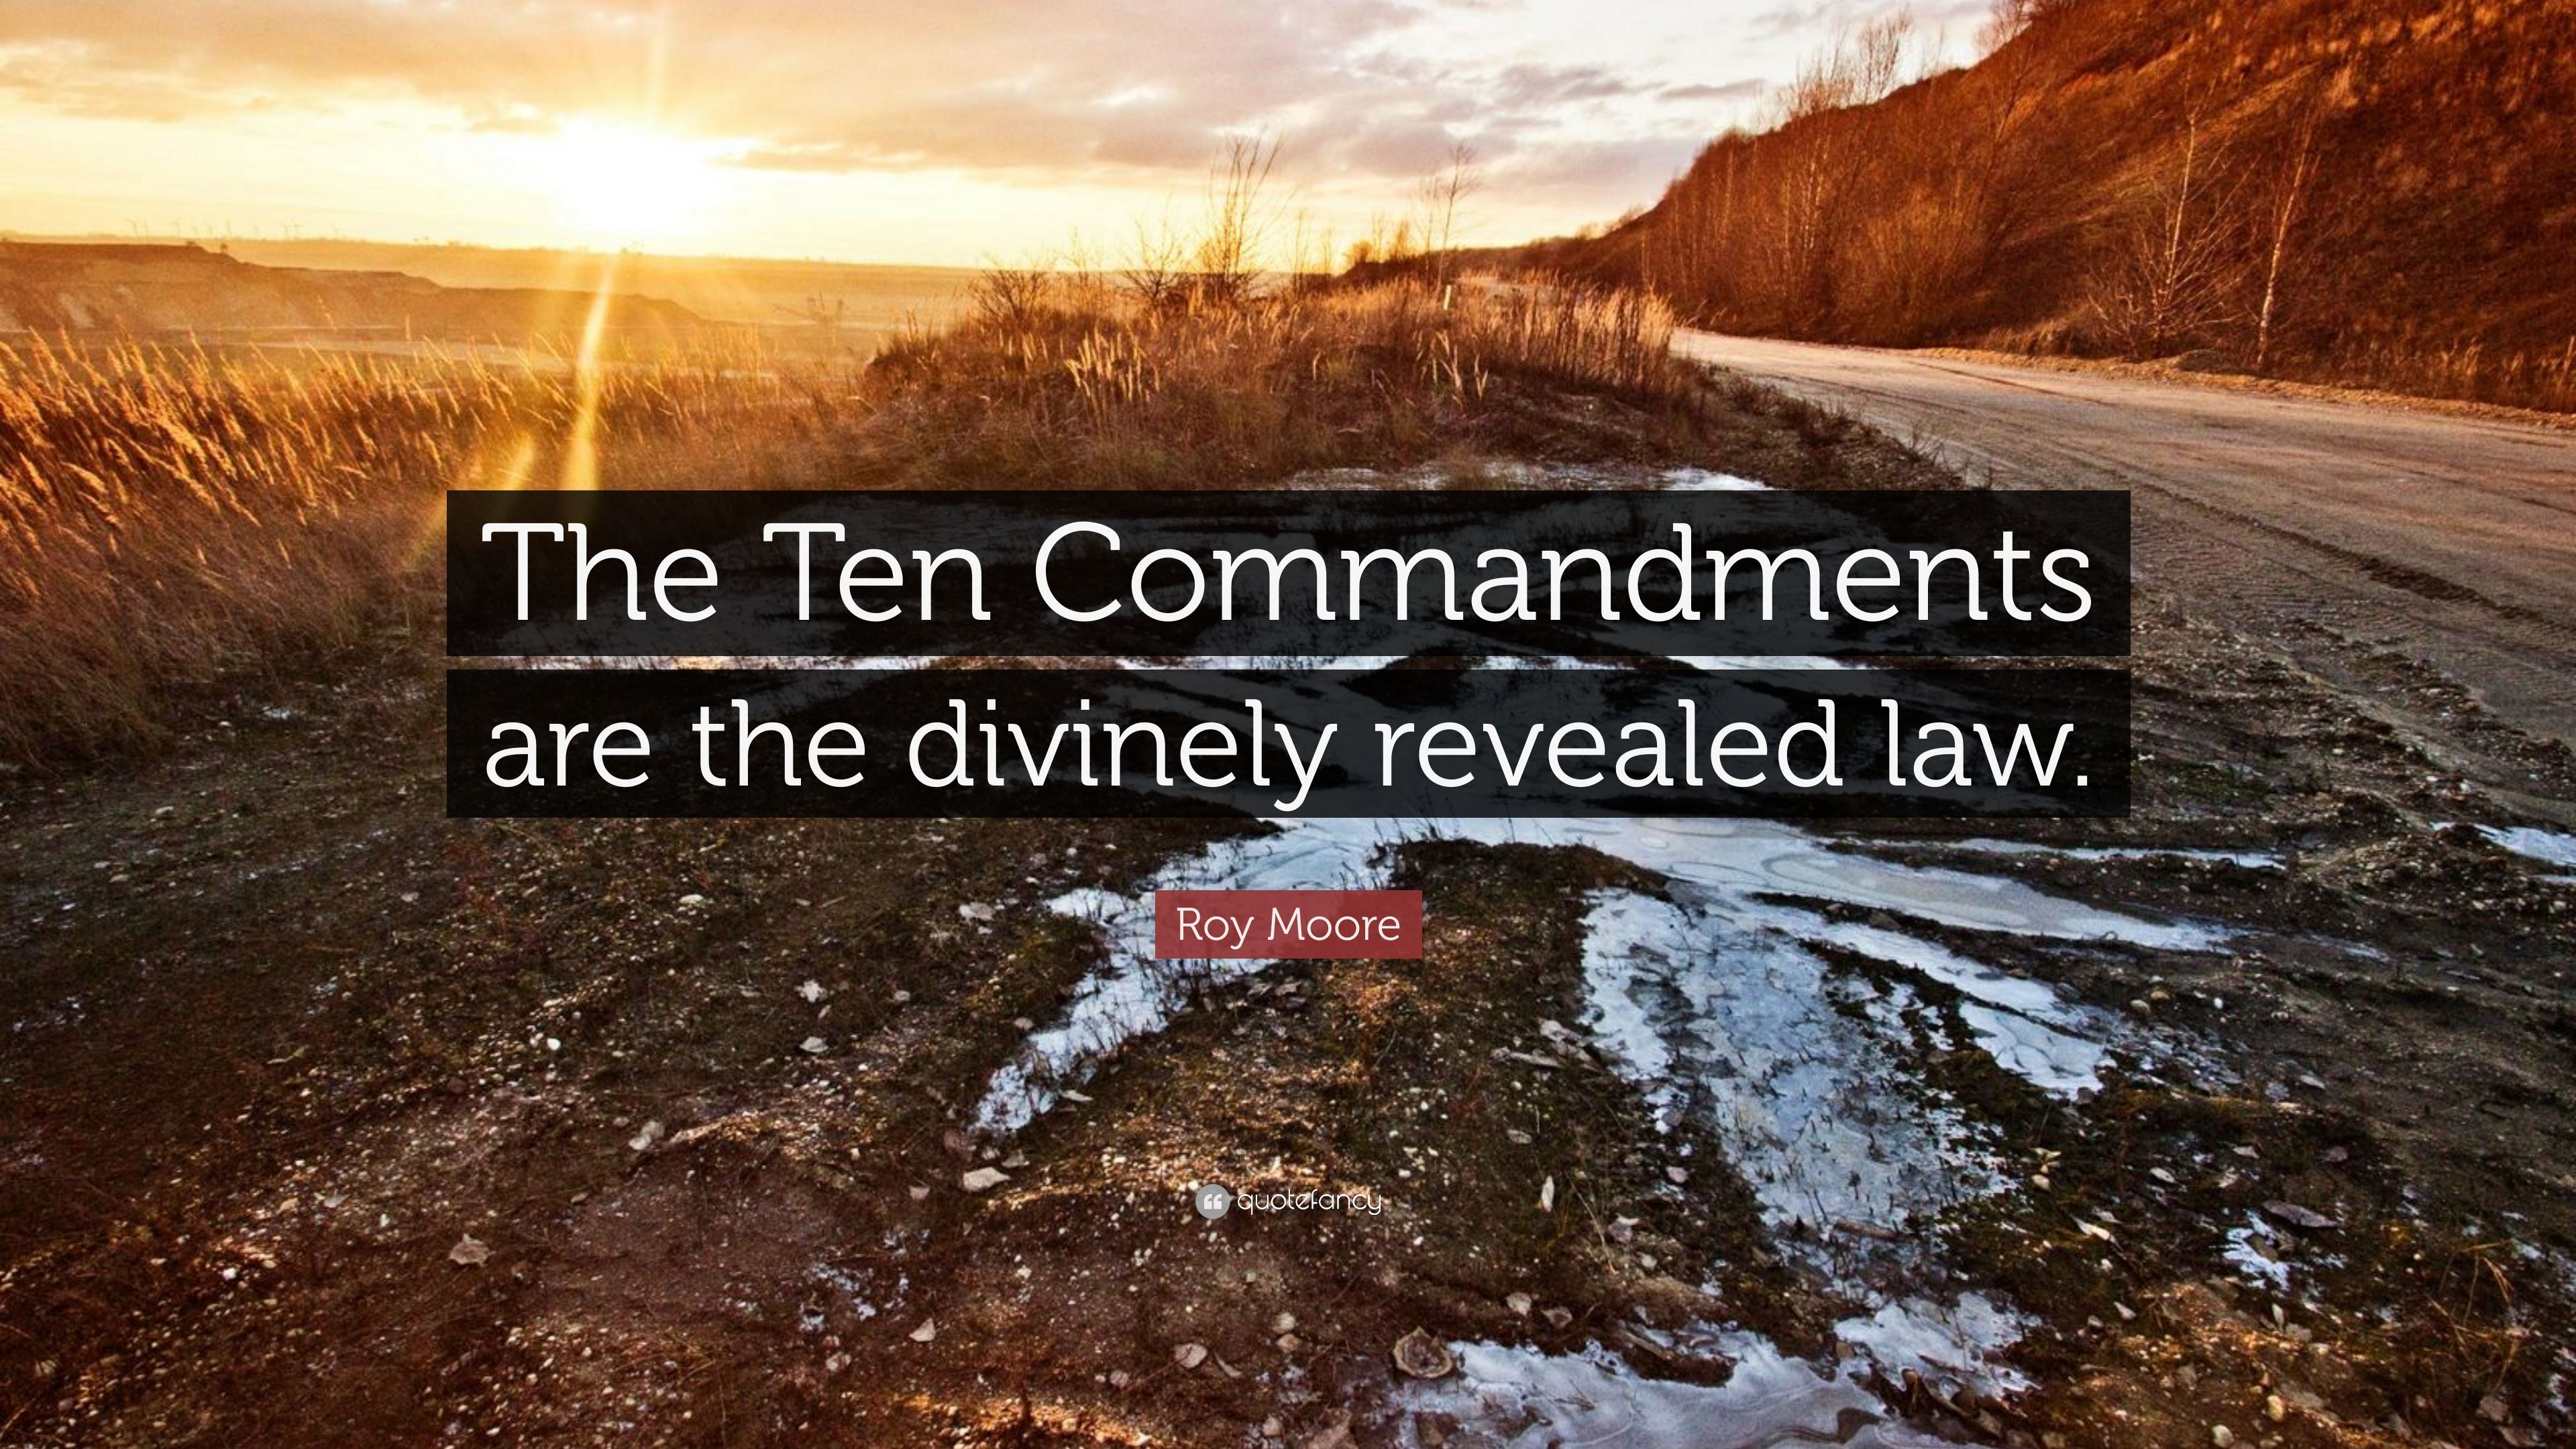 Roy Moore Quote: “The Ten Commandments are the divinely revealed